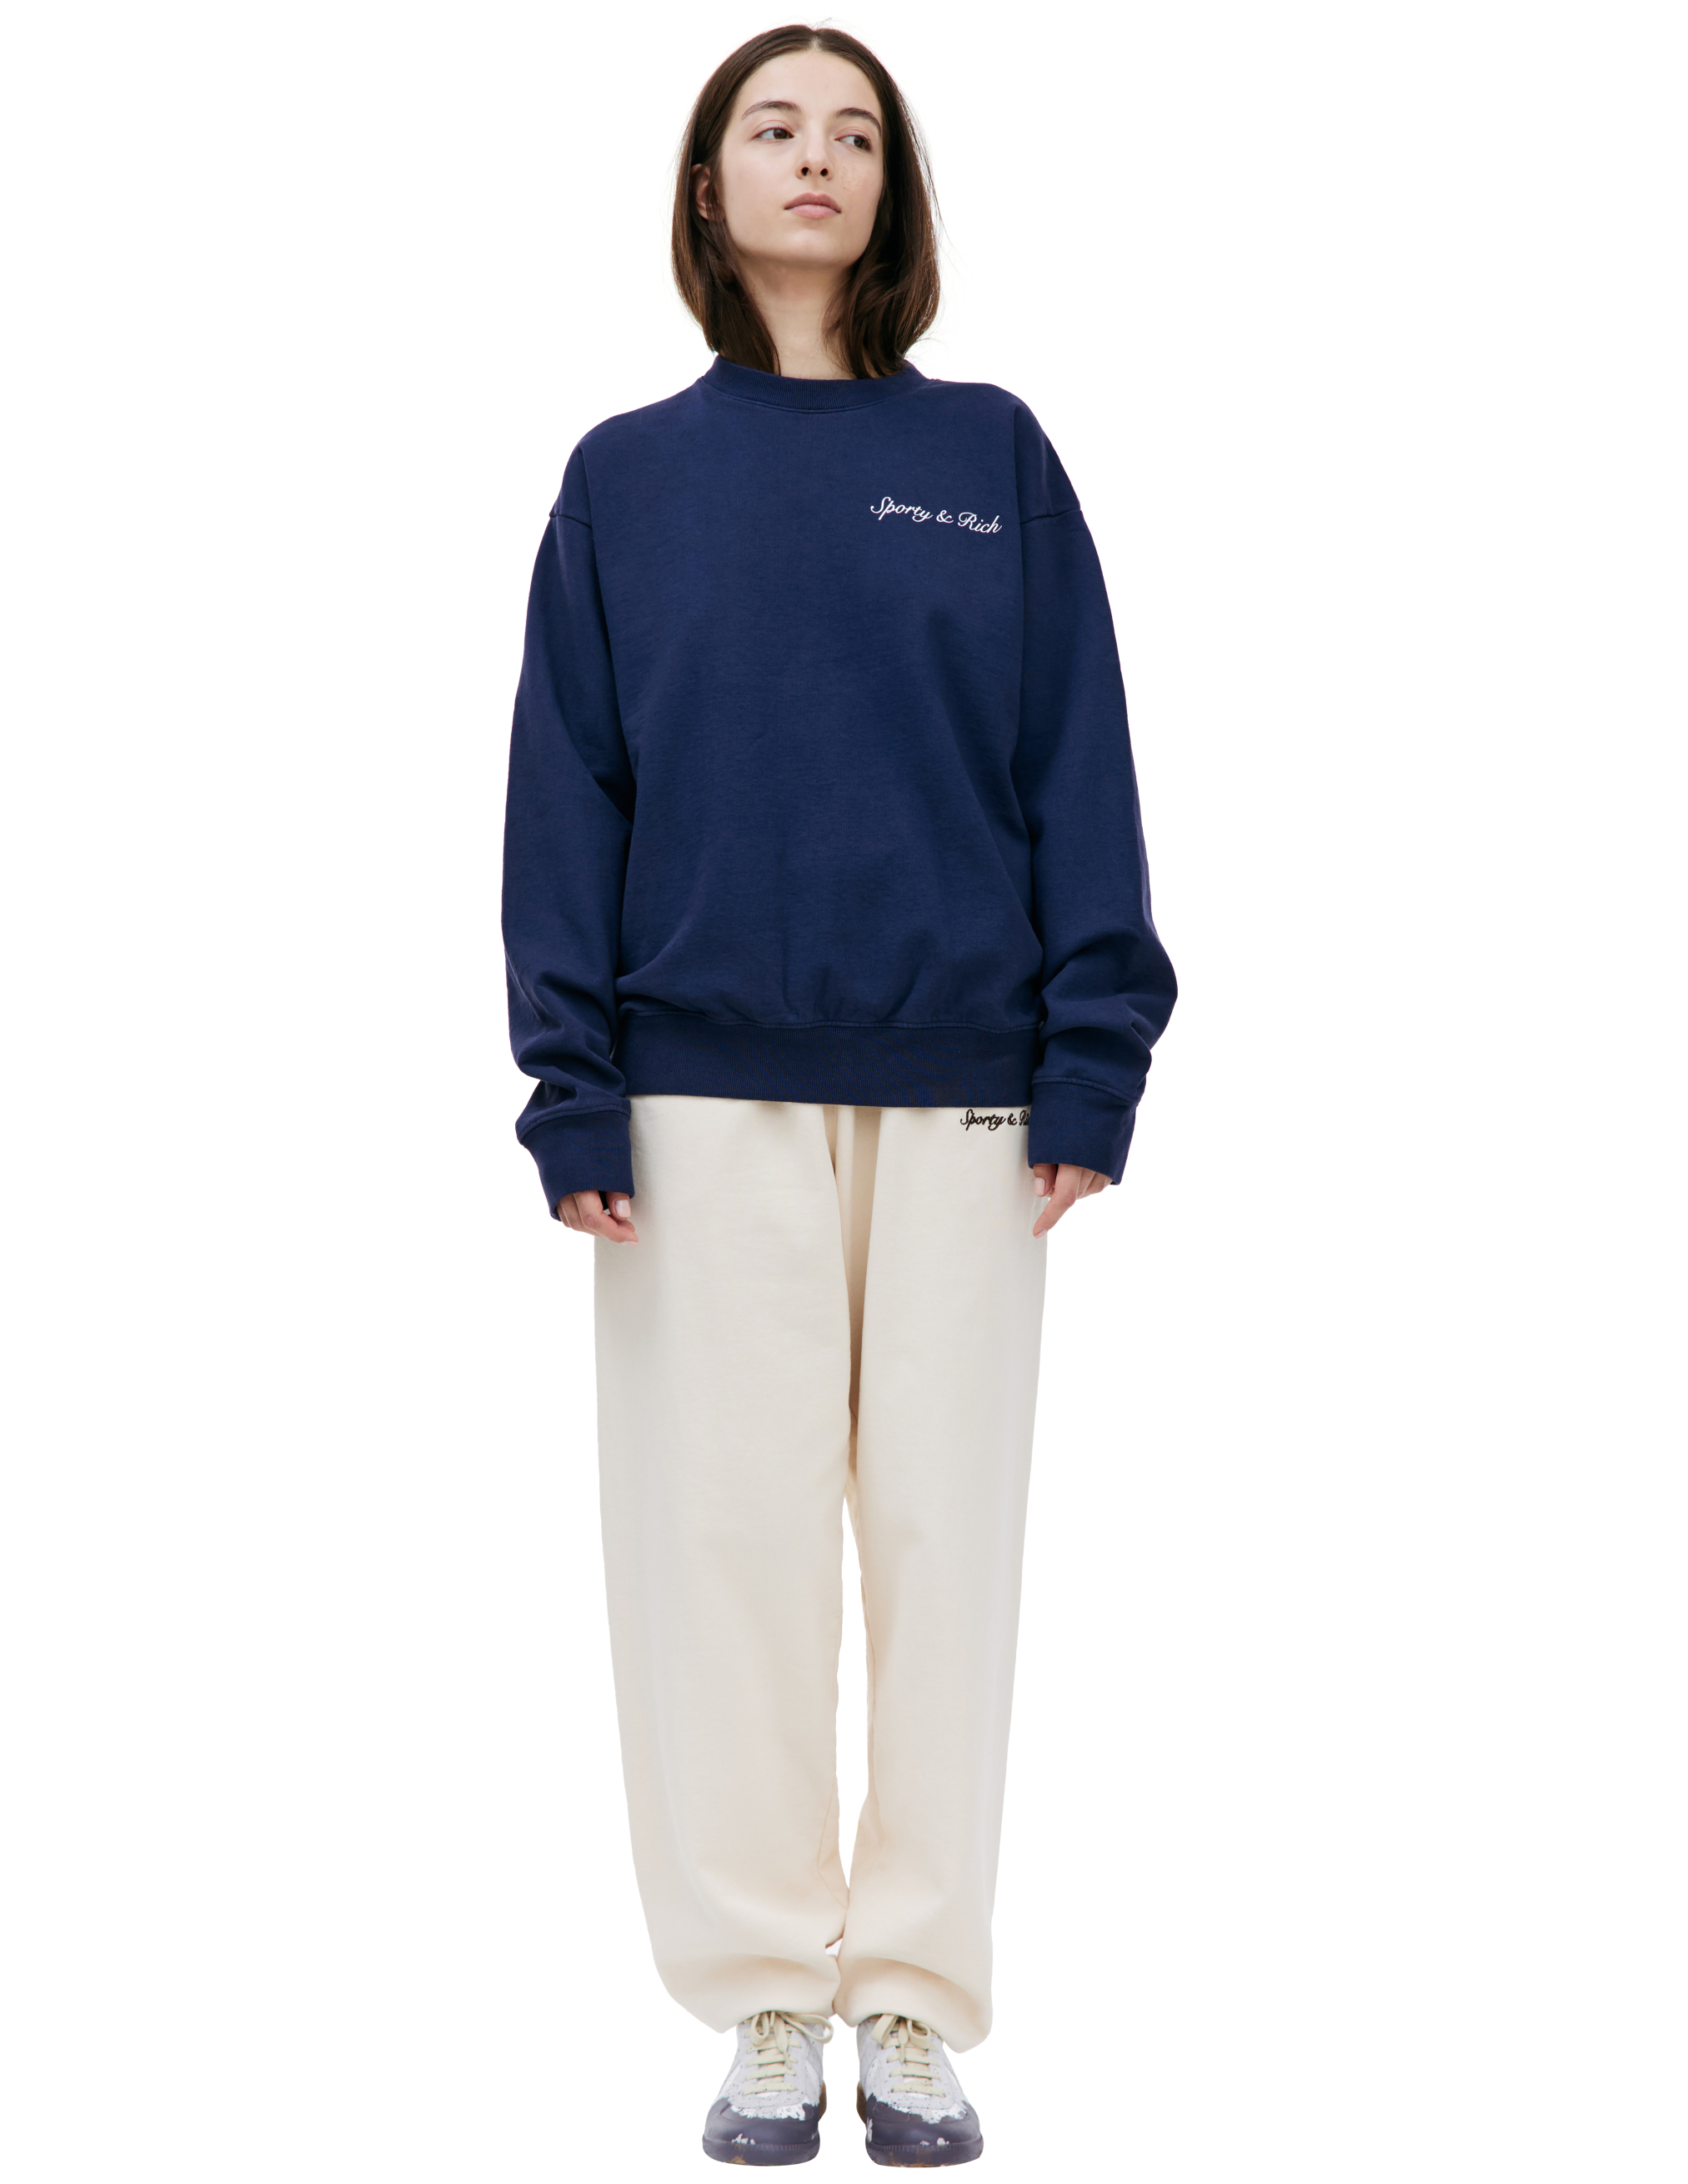 Shop Sporty And Rich 'syracuse' Cotton Sweatshirt In Navy Blue